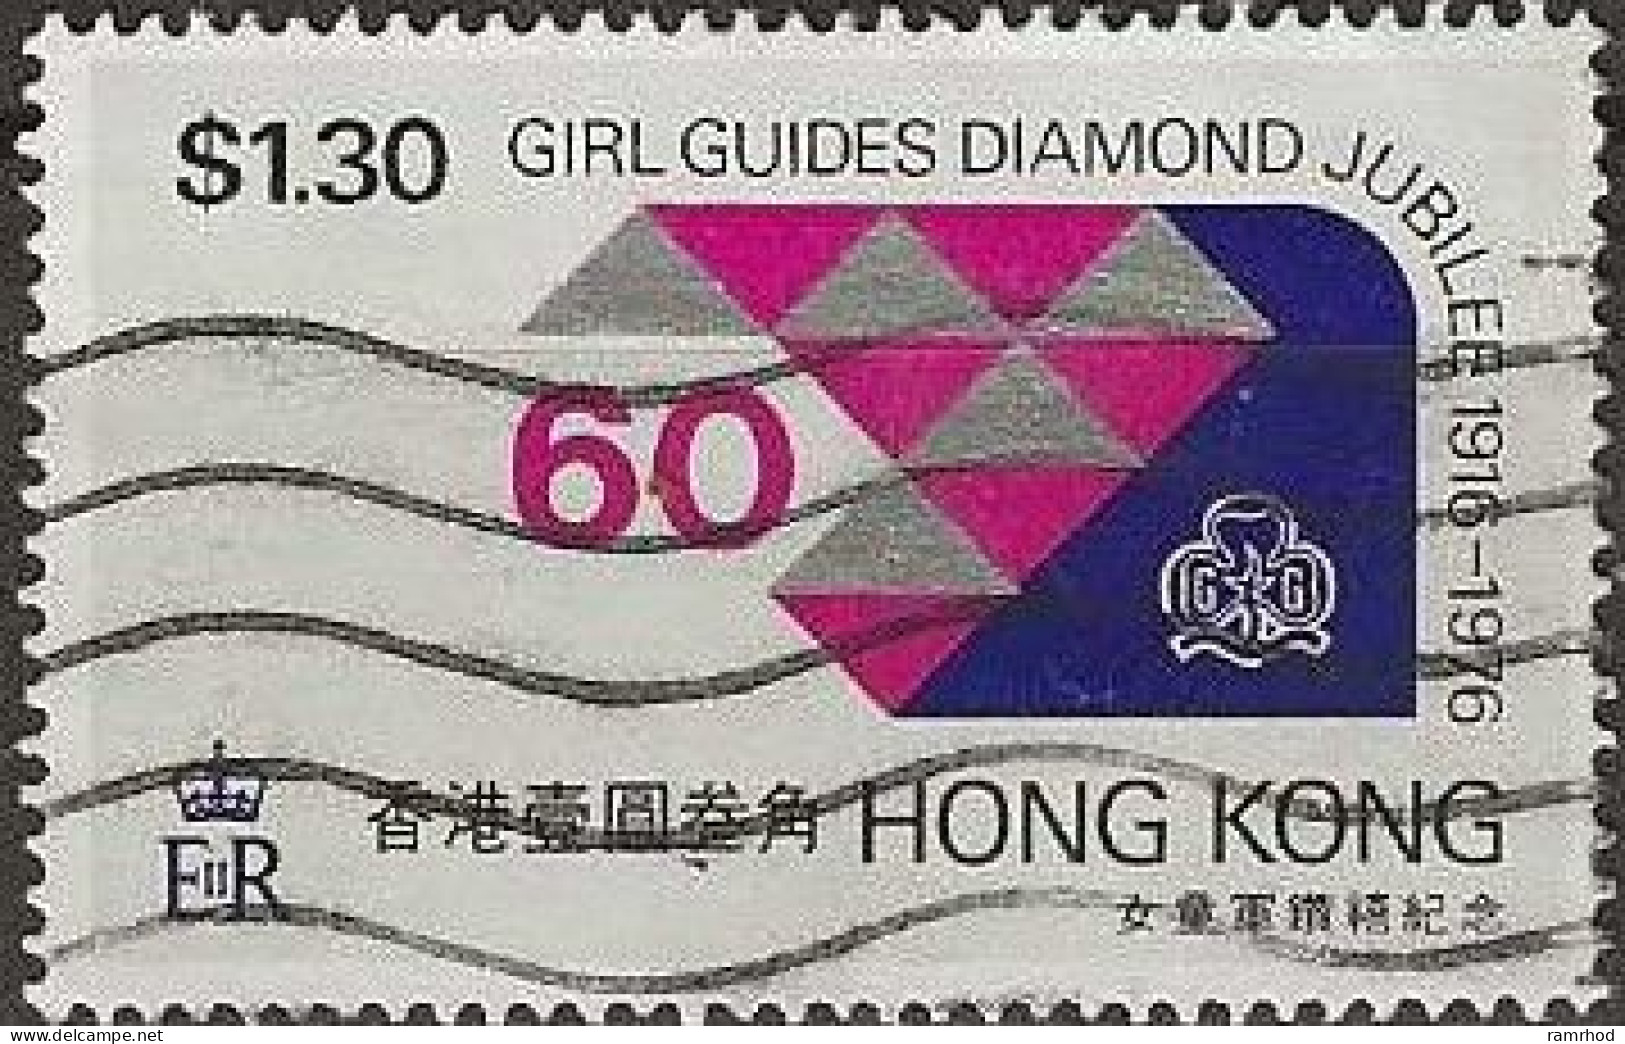 HONG KONG 1976 Diamond Jubilee Of Girl Guides - $1.30 - Badge, Stylised Diamond And '60' FU - Oblitérés